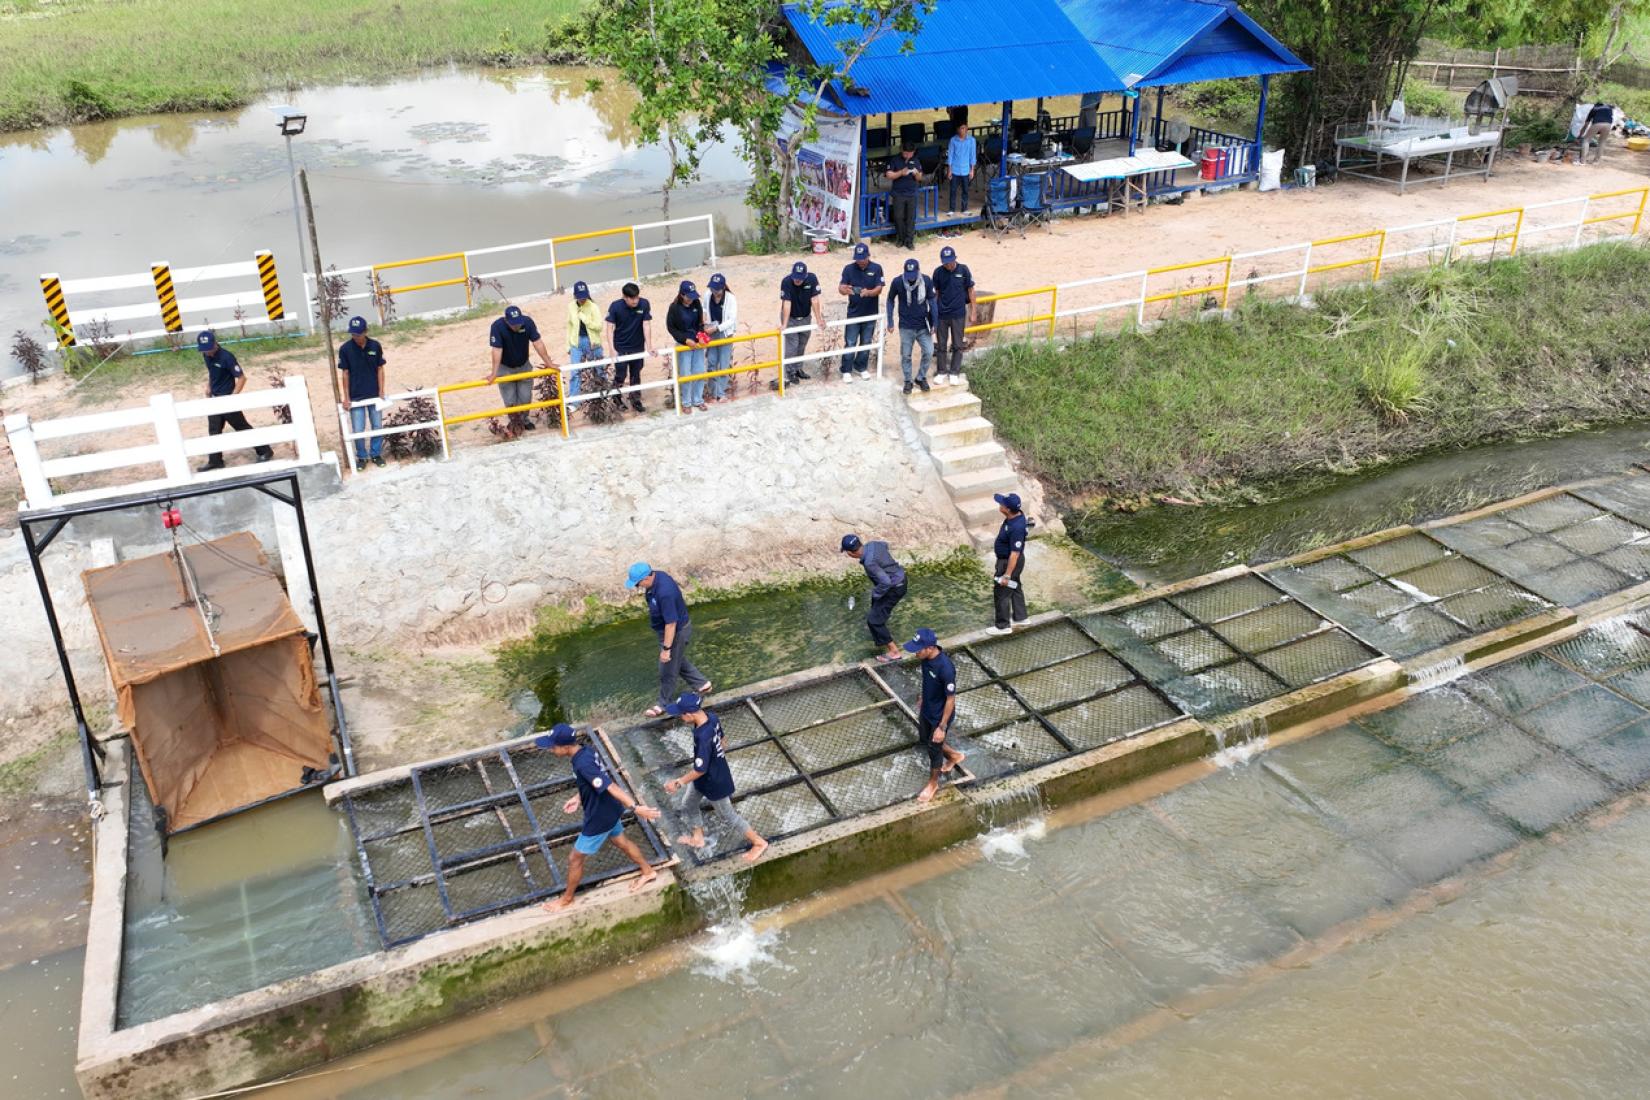 The Fish Tech project organised a site visit for participants of the four-day Fishway Master Class to gain hands-on experience at the Sleng Fishway, observing its construction, functionality, and design.